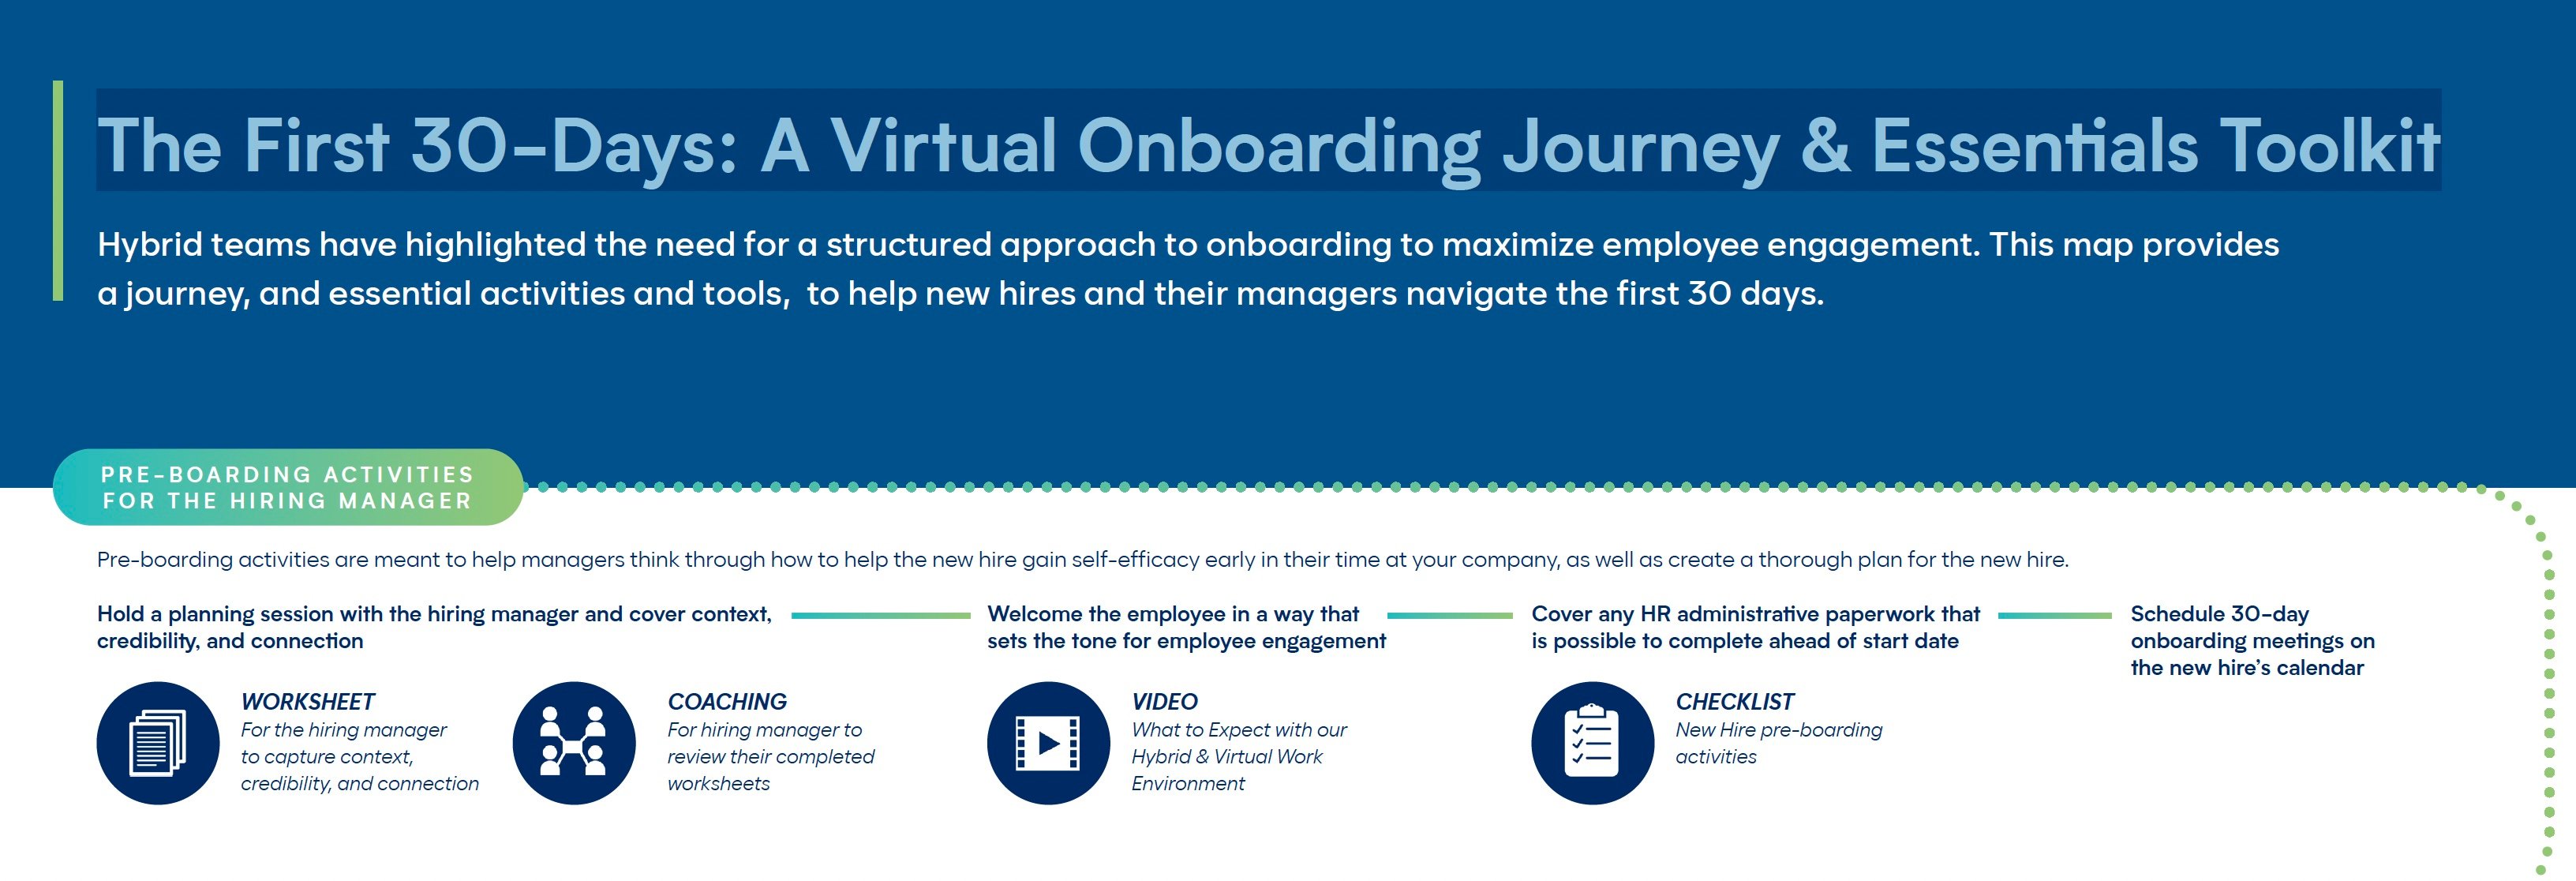 The First 30-Days: A Virtual Onboarding Journey & Essentials Toolkit